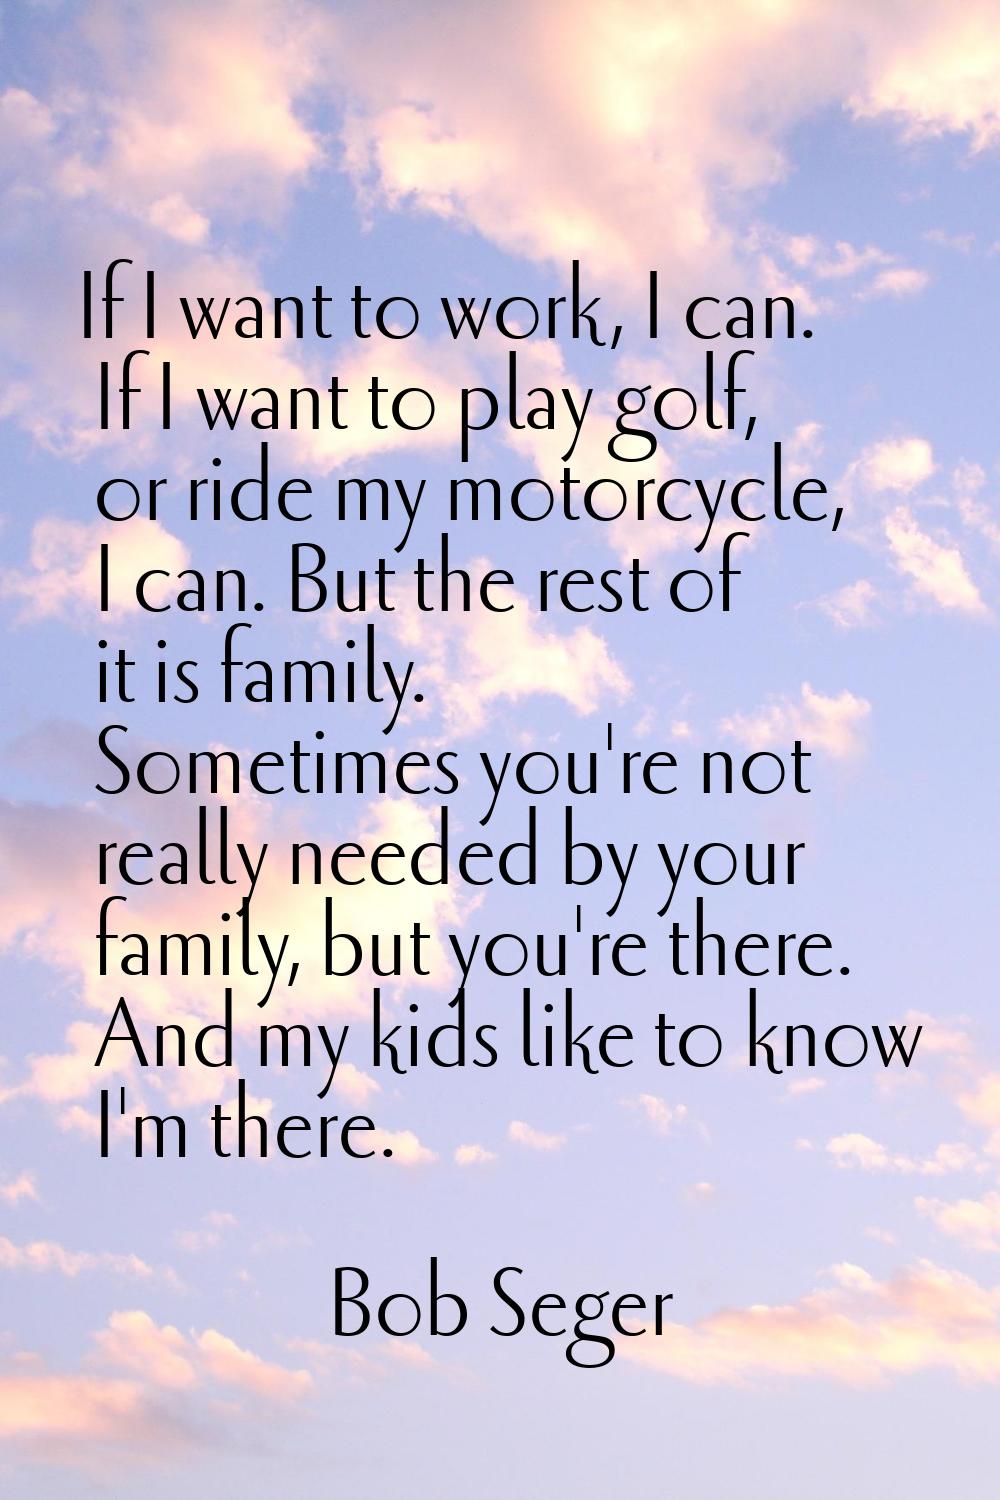 If I want to work, I can. If I want to play golf, or ride my motorcycle, I can. But the rest of it 